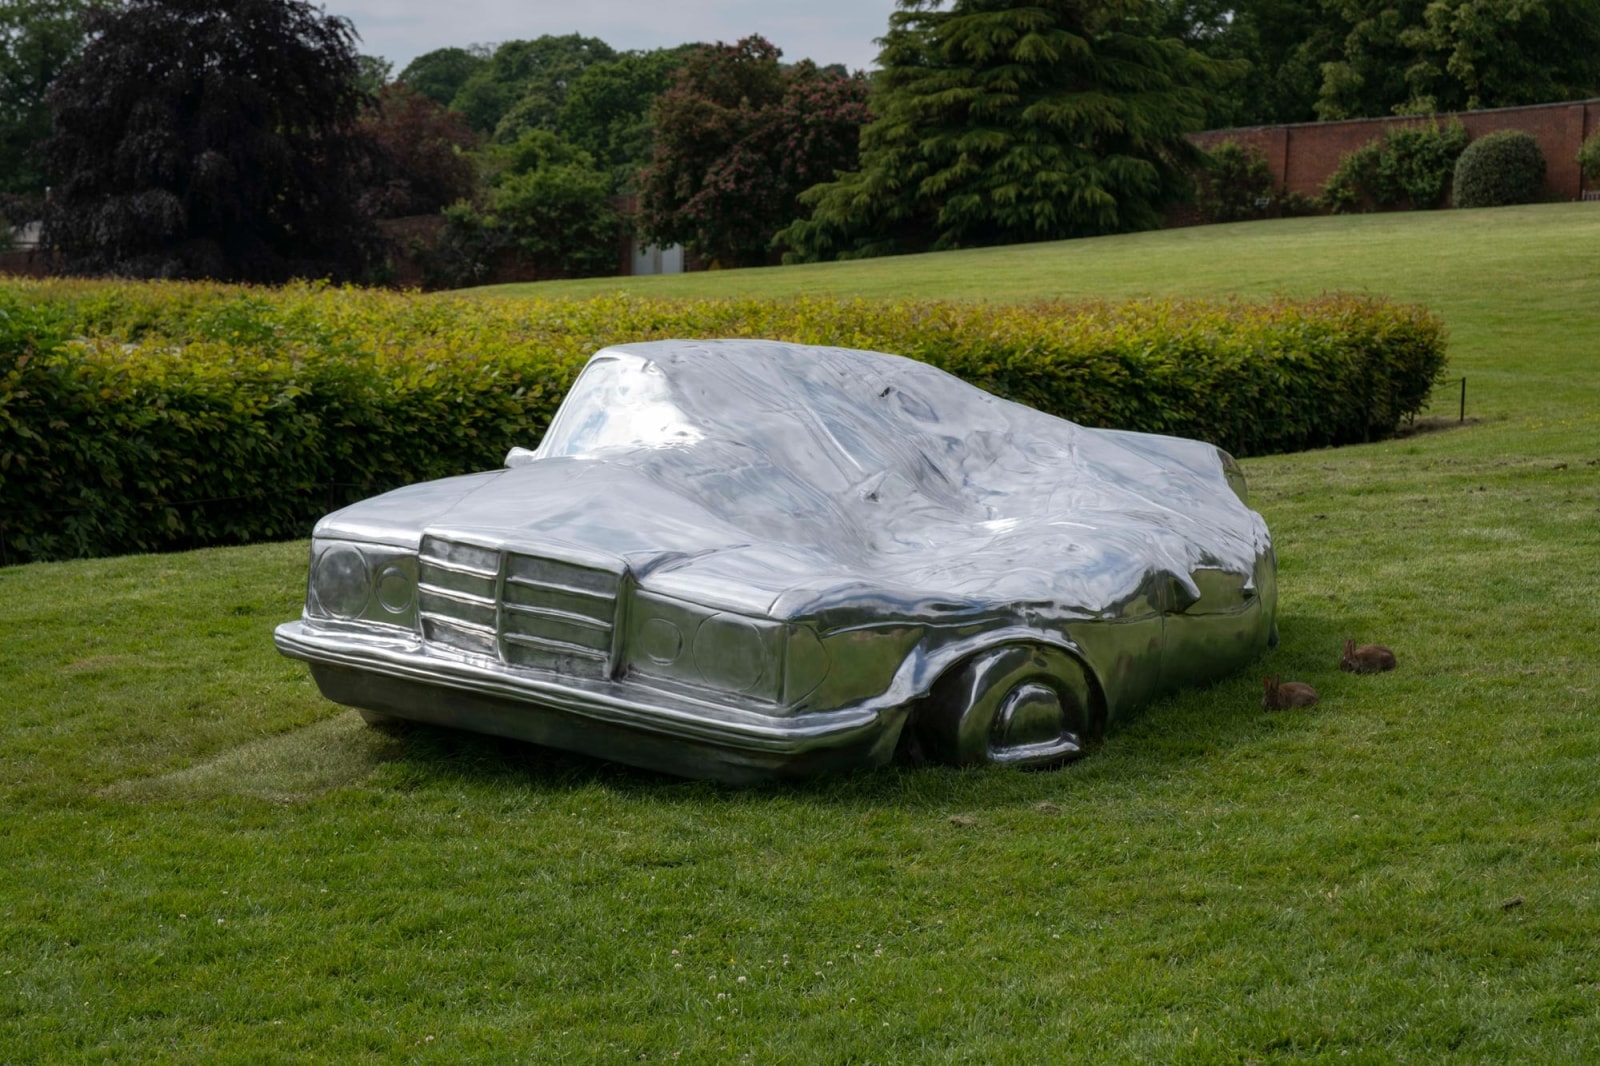 Erwin Wurm: Trap of the Truth, Installation view